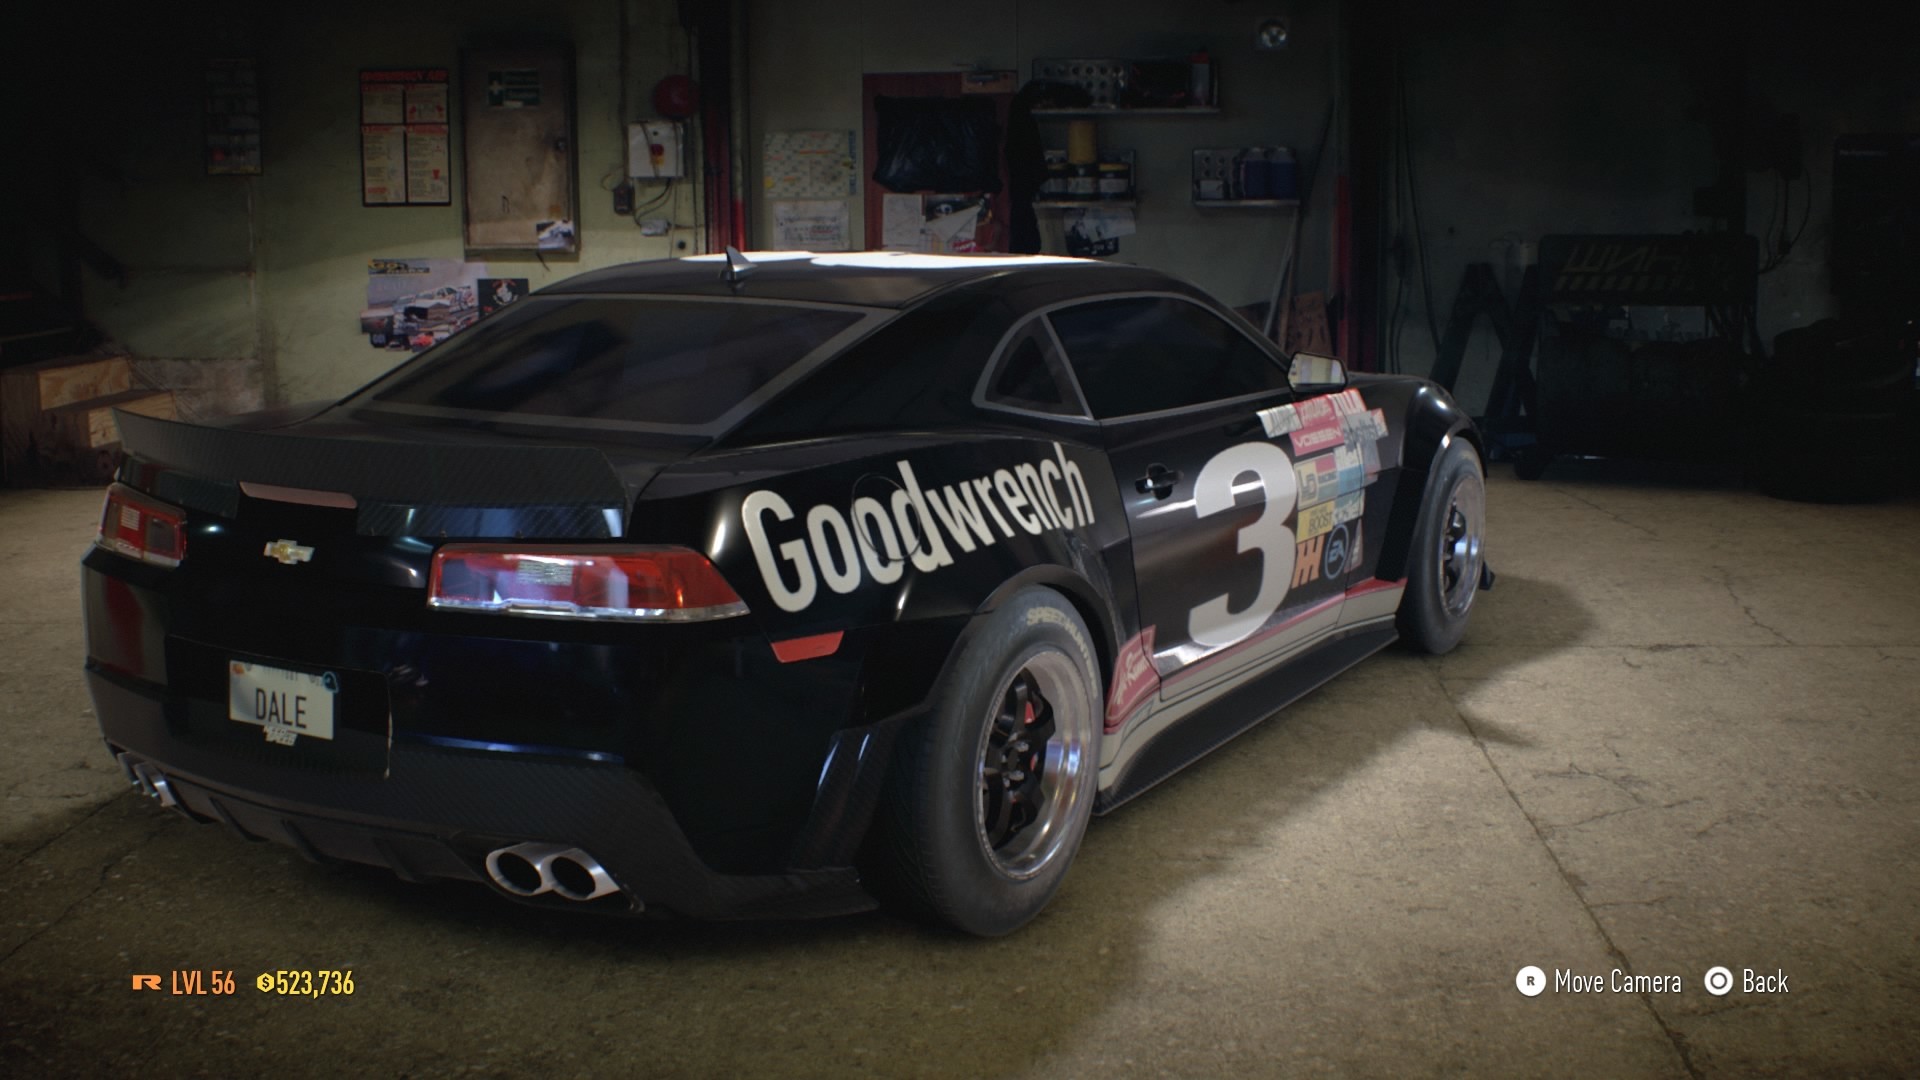 1920x1080 Dale Earnhardt Sr tribute wrap with fixed